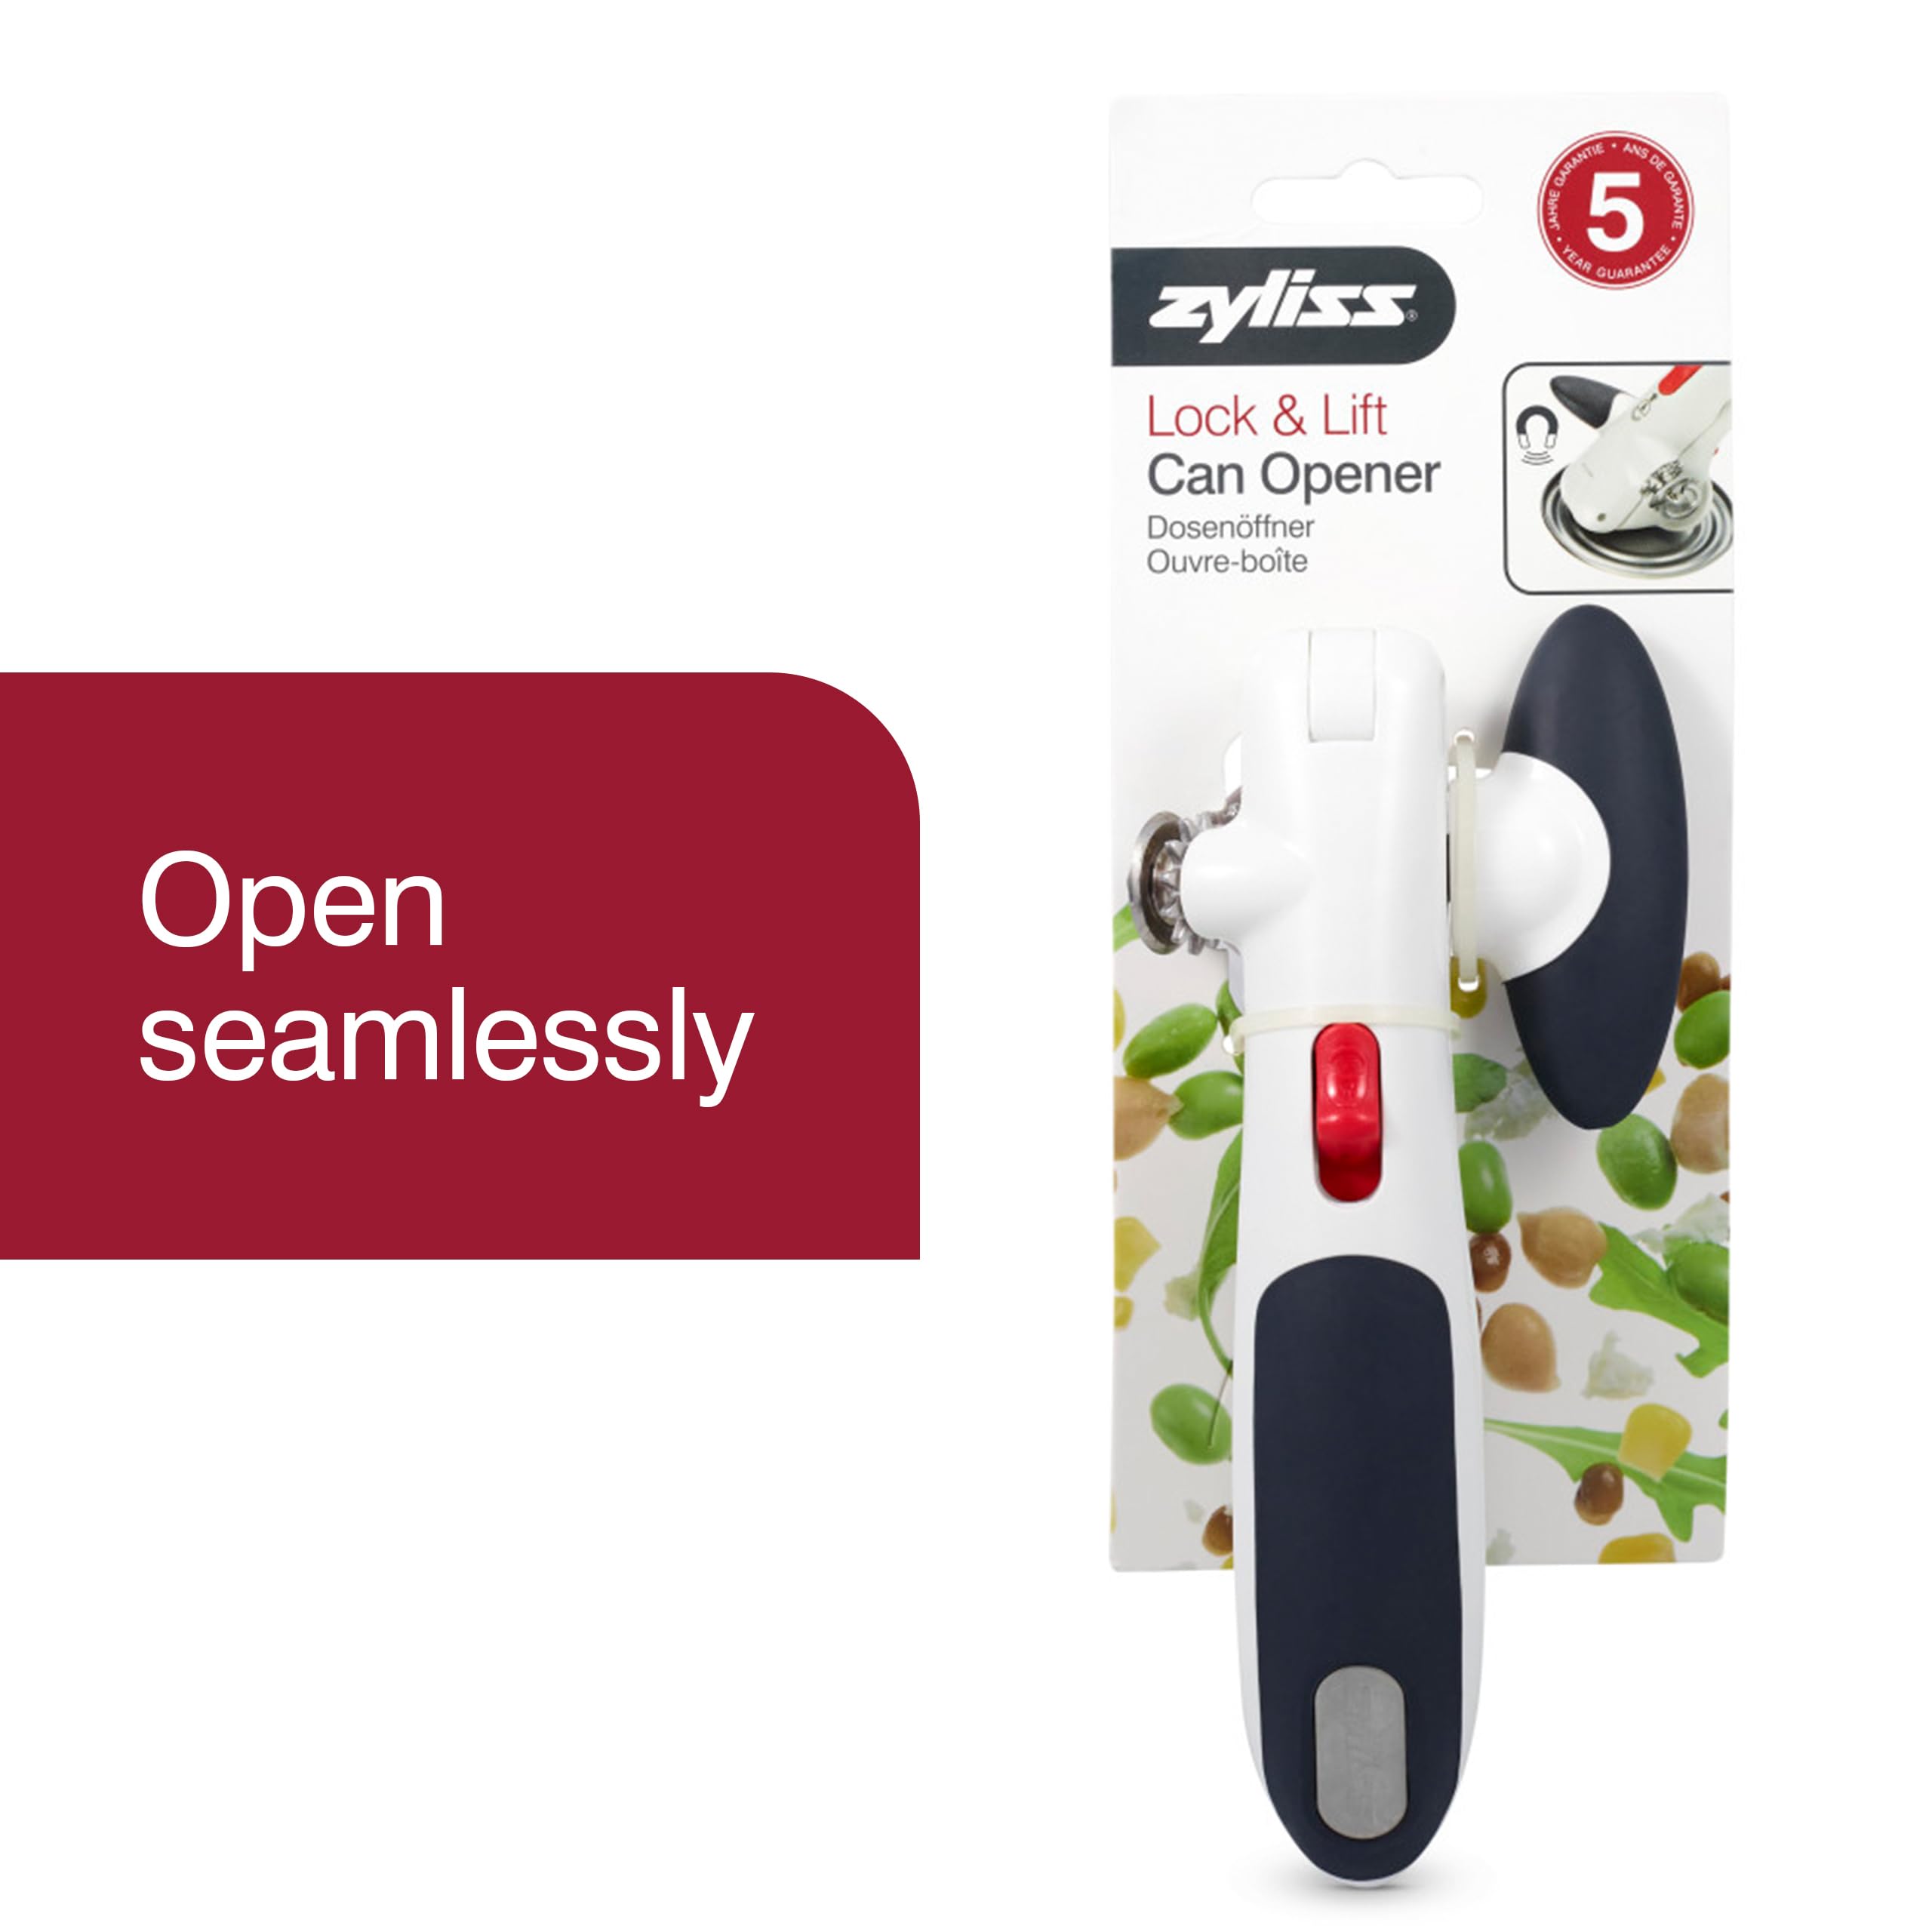 Zyliss Lock N' Lift Can Opener - Manual Can Opener with Locking Mechanism - Safe Magnetic Can Opener - Easy-to-Turn Can Opener - White/Gray